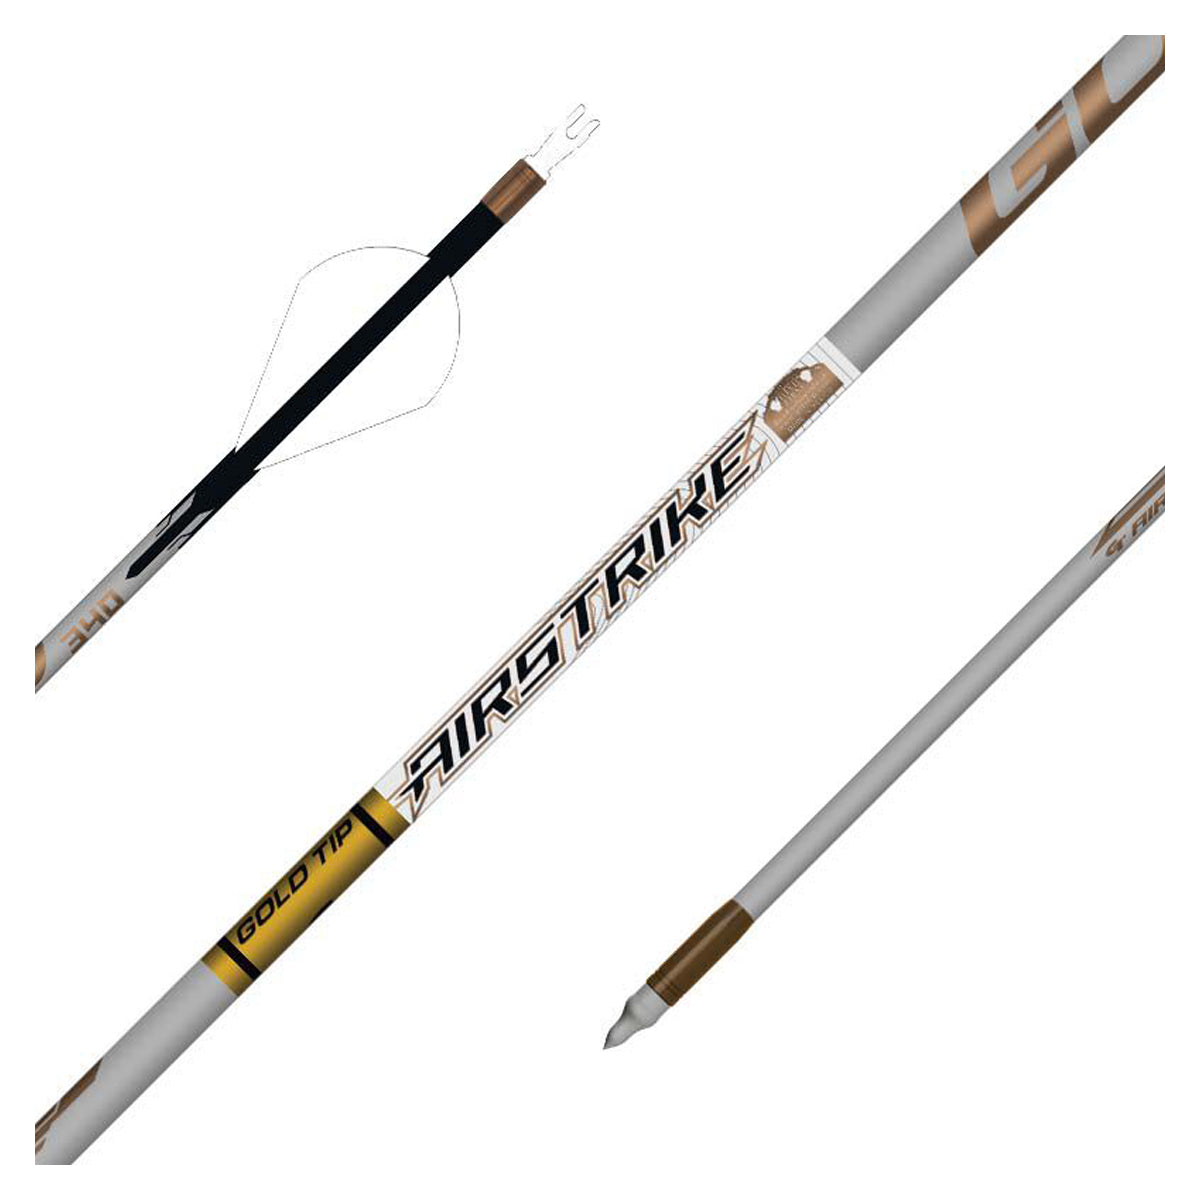 Gold Tip AirStrike Pre-Fletched Arrows - 6 Count